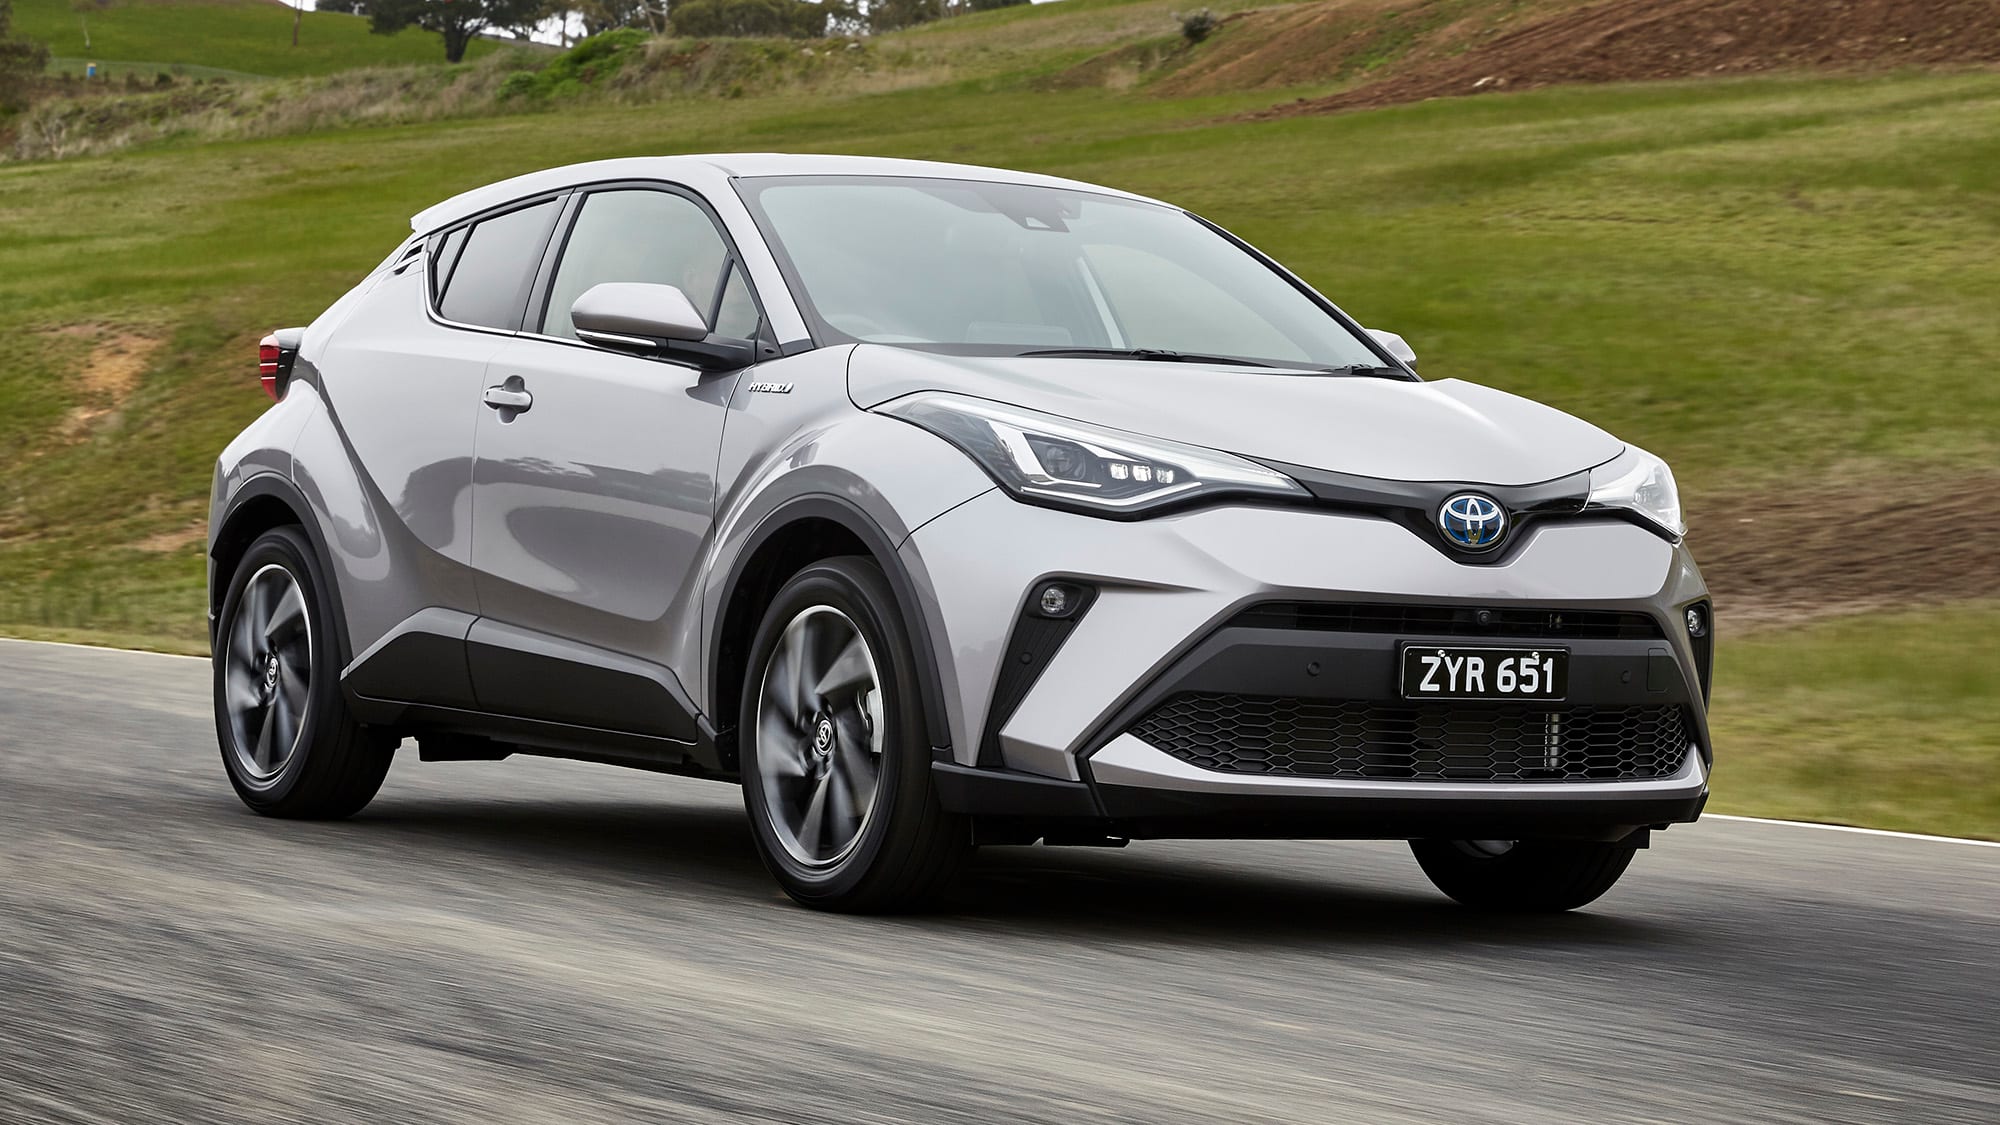 RAV4 News, Articles, Stories & Trends for Today